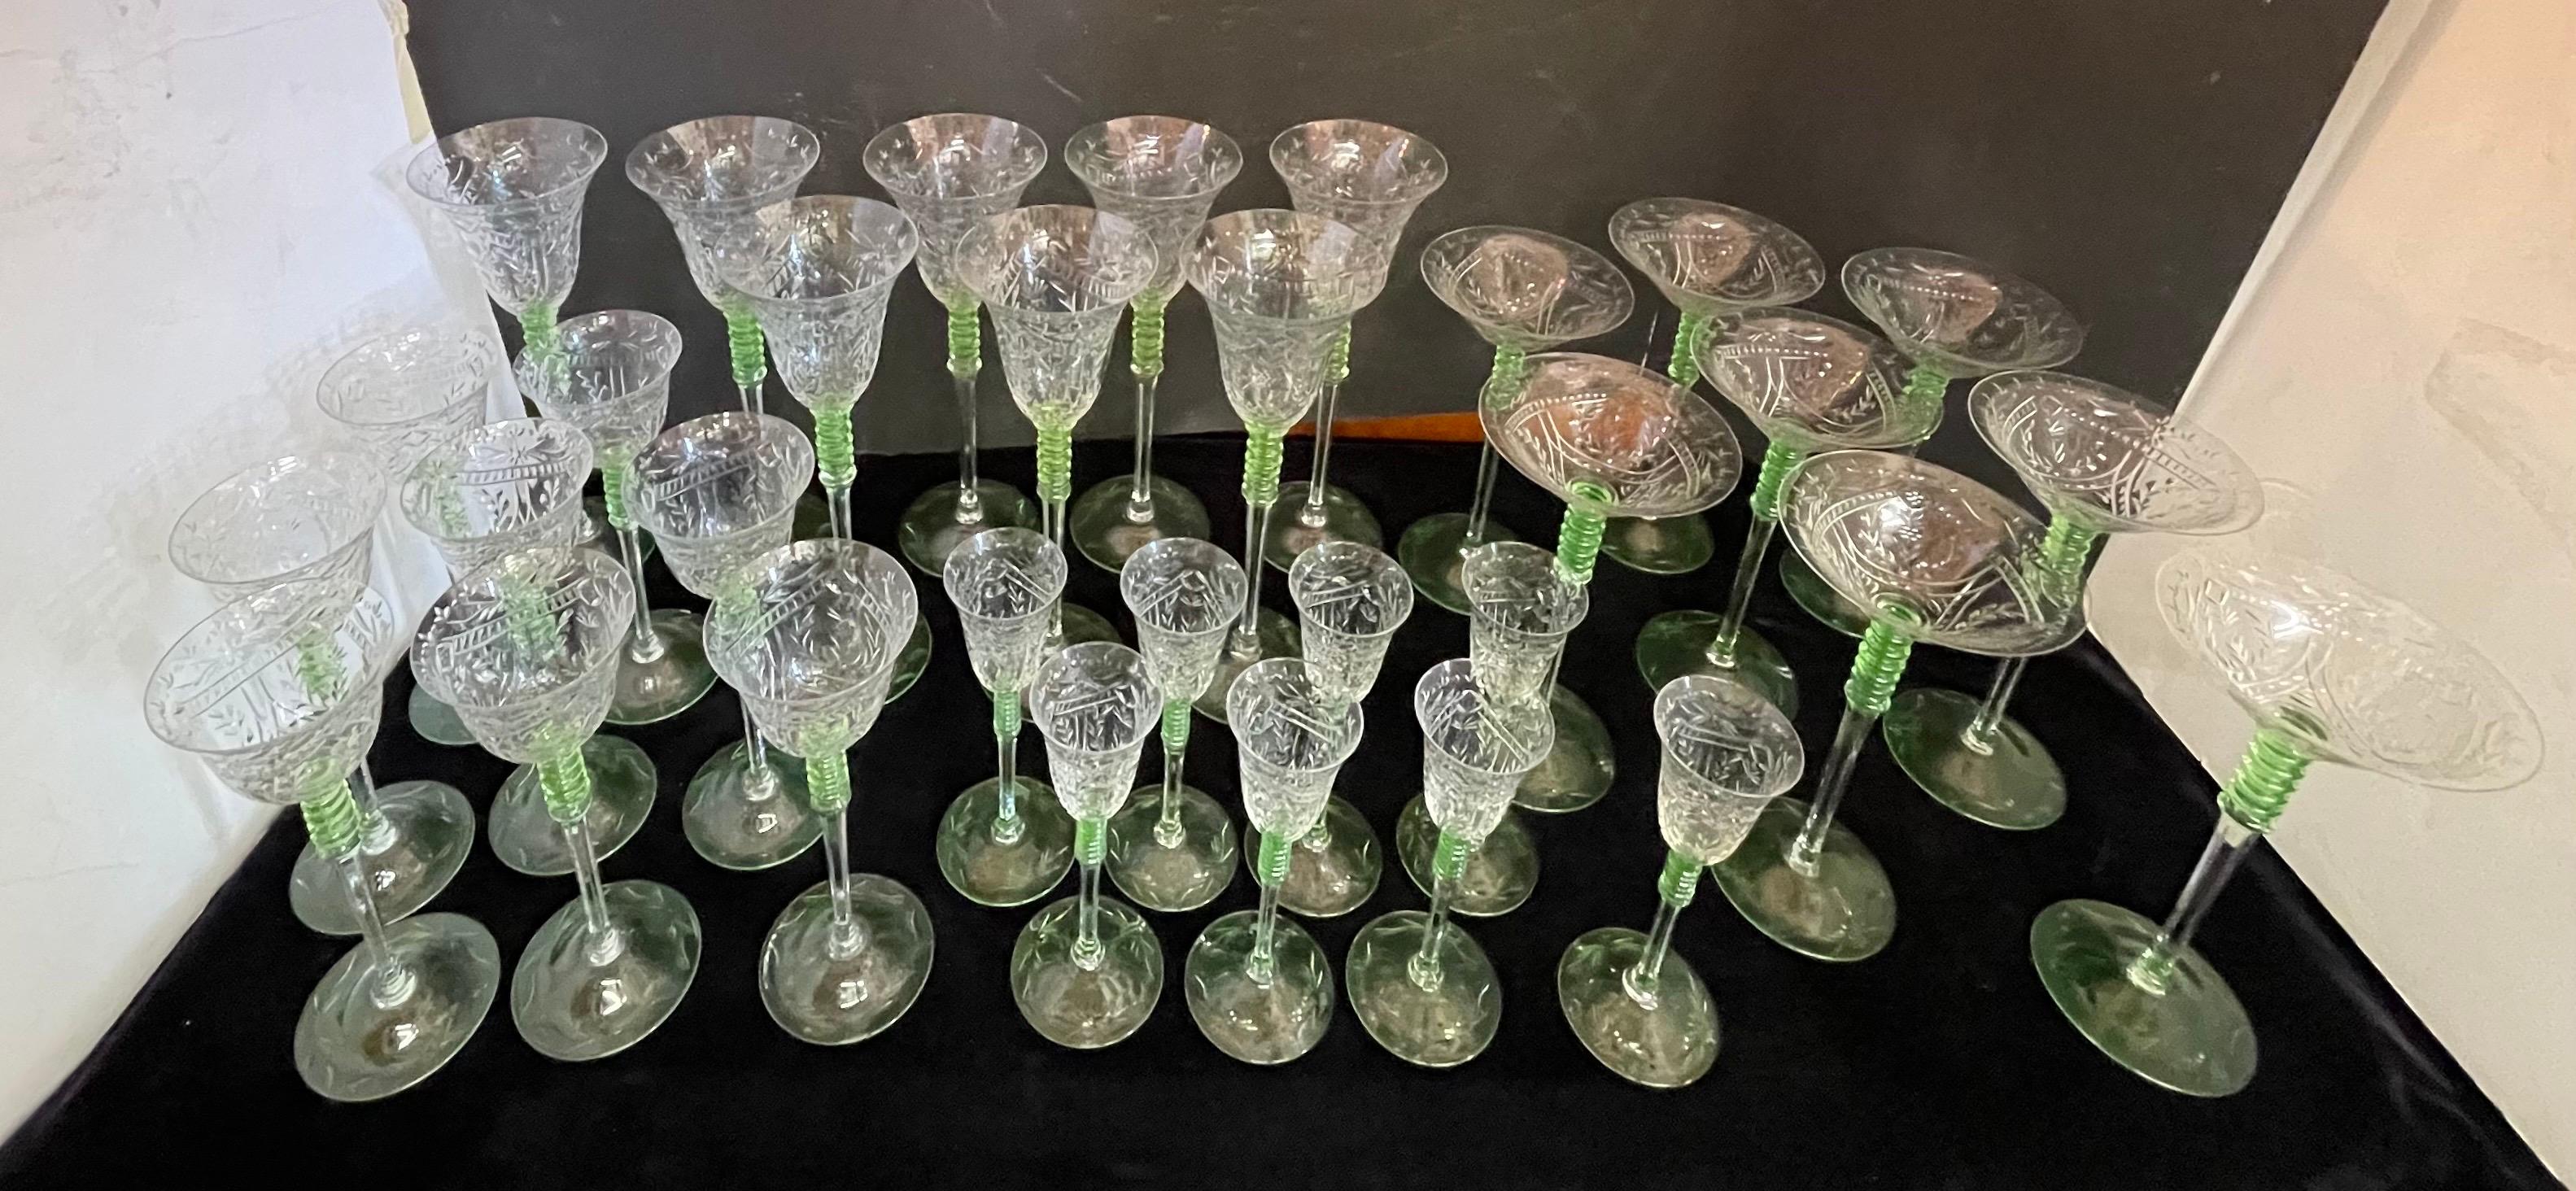 A Wonderful Service Of Approx. 40 Bohemian Green Tinted Etched Cut Crystal Bar Glasses Stemware 
Consisting Of 8 Pieces Per Place Setting In 4 Different Sizes...
Currently On Southey's For More Then Double The Price.